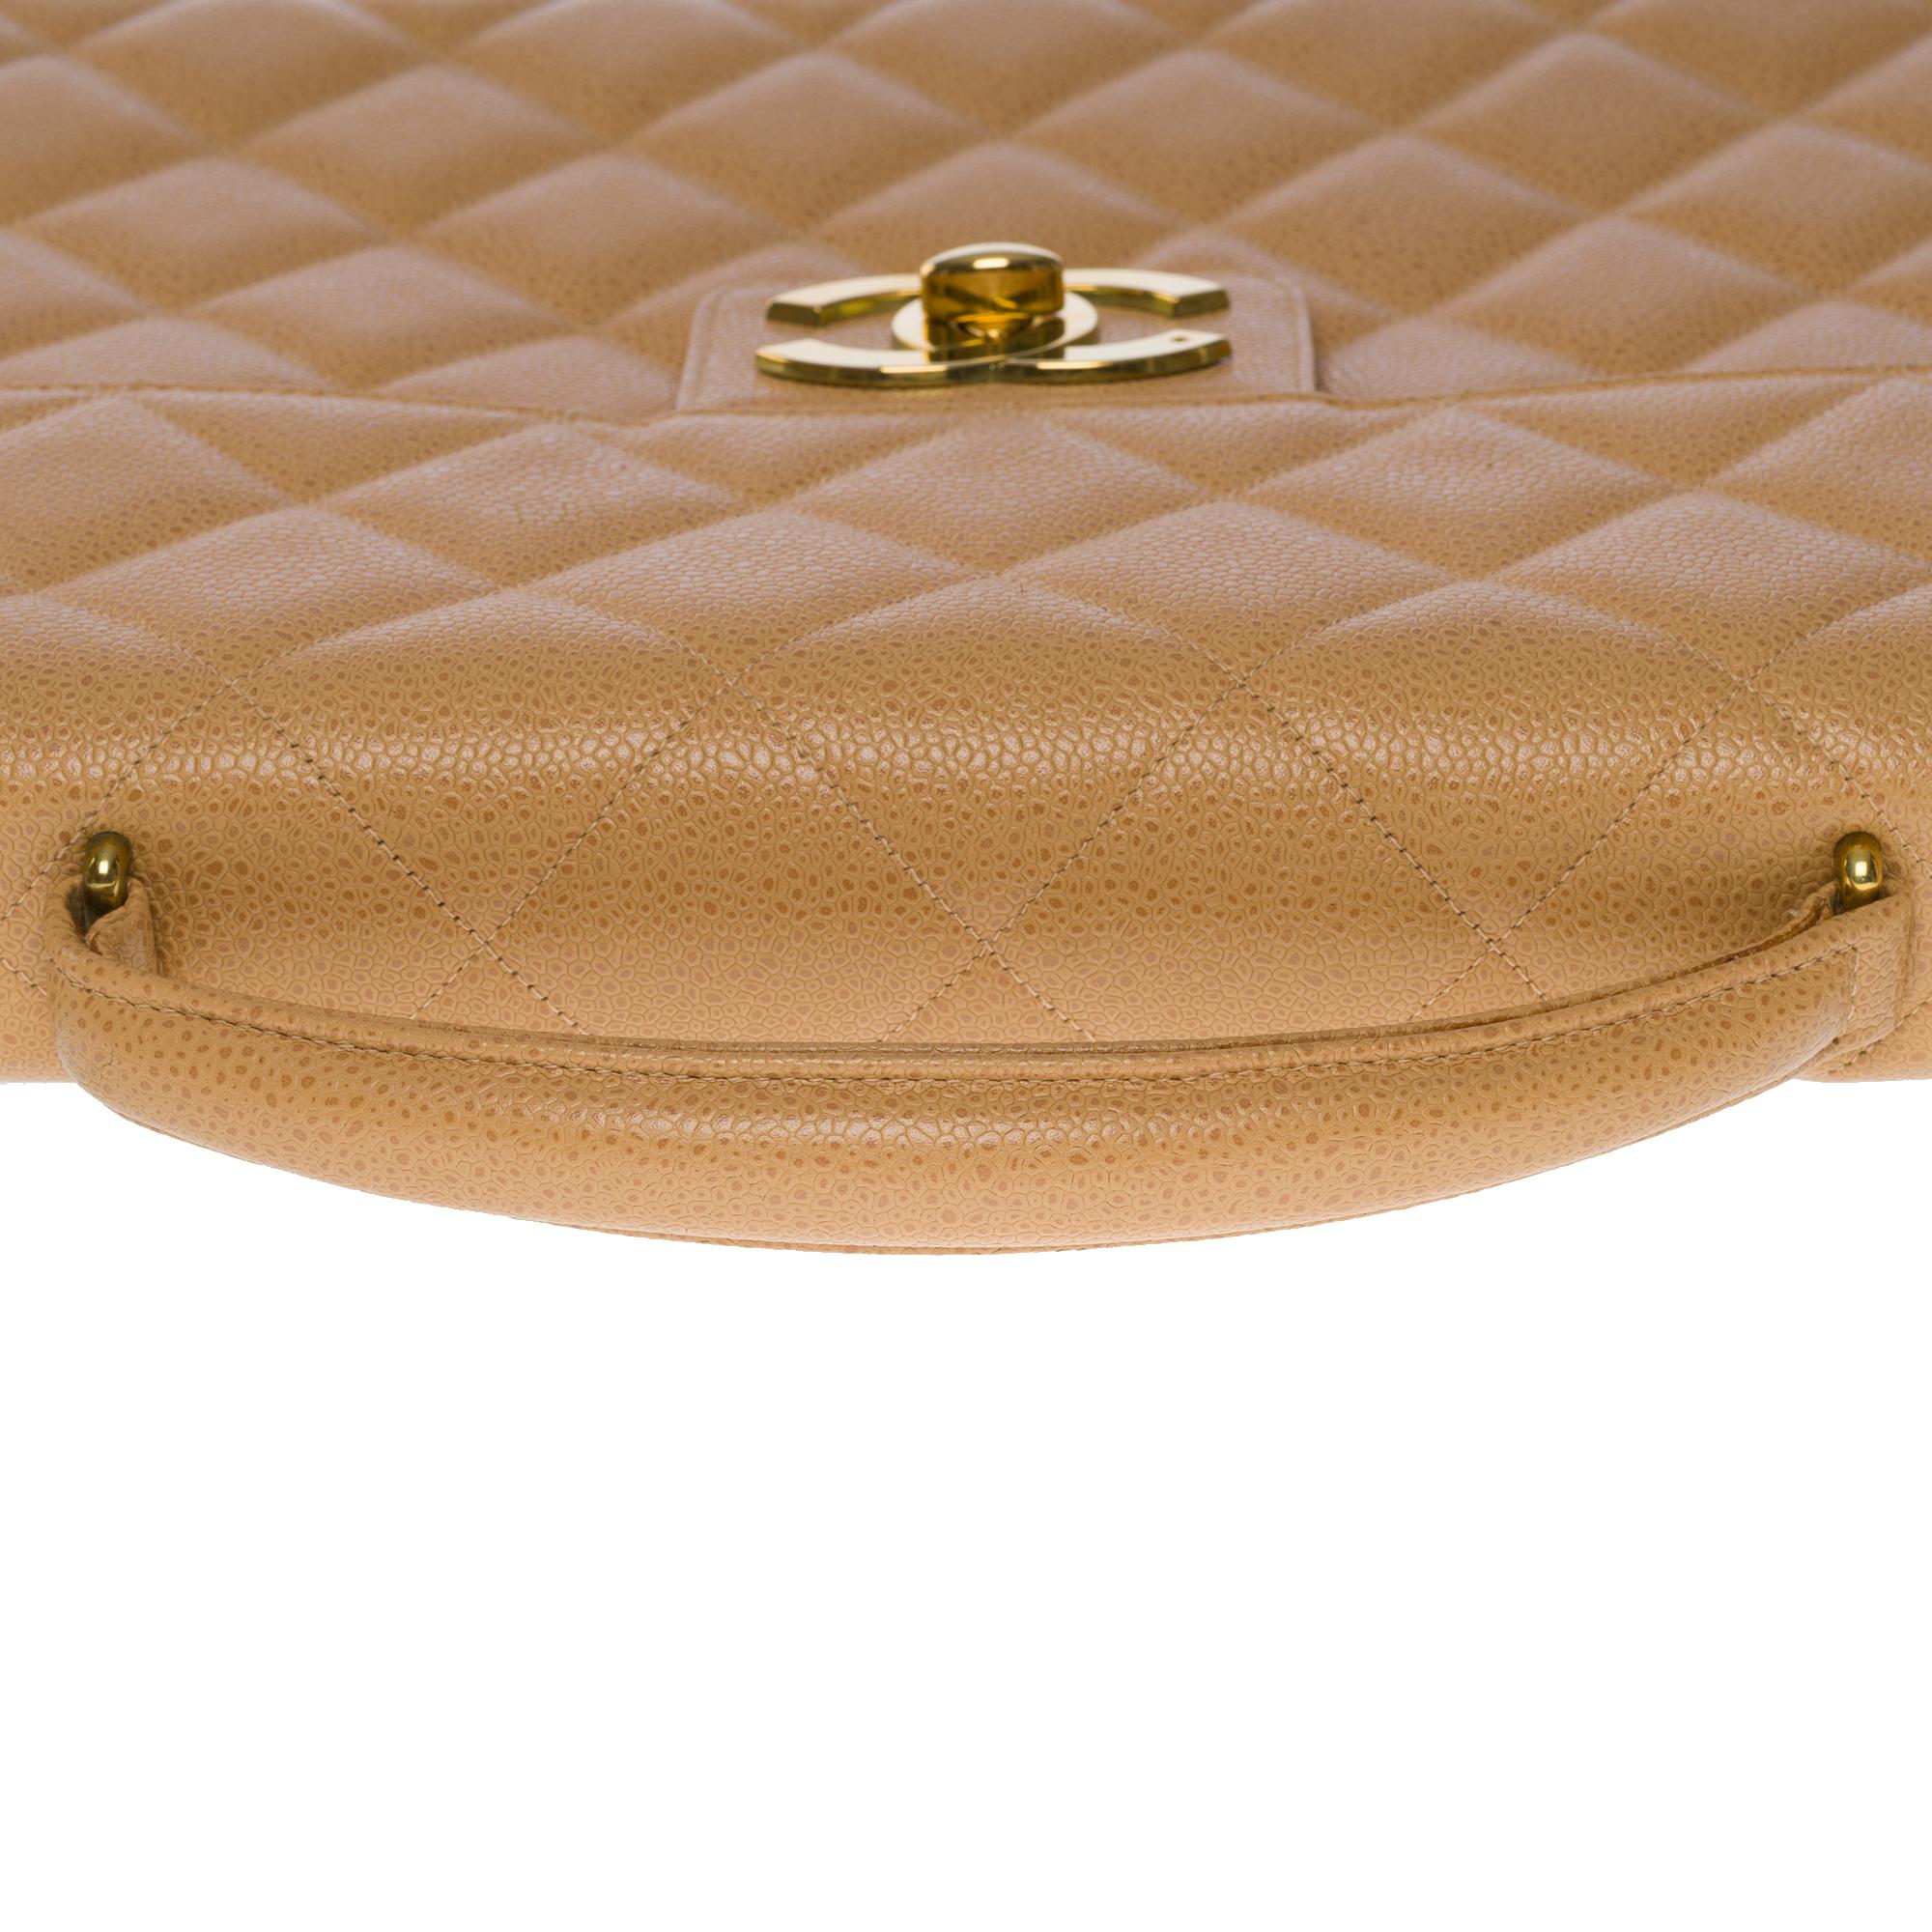 Amazing Chanel vintage Briefcase in beige caviar leather, GHW For Sale 3